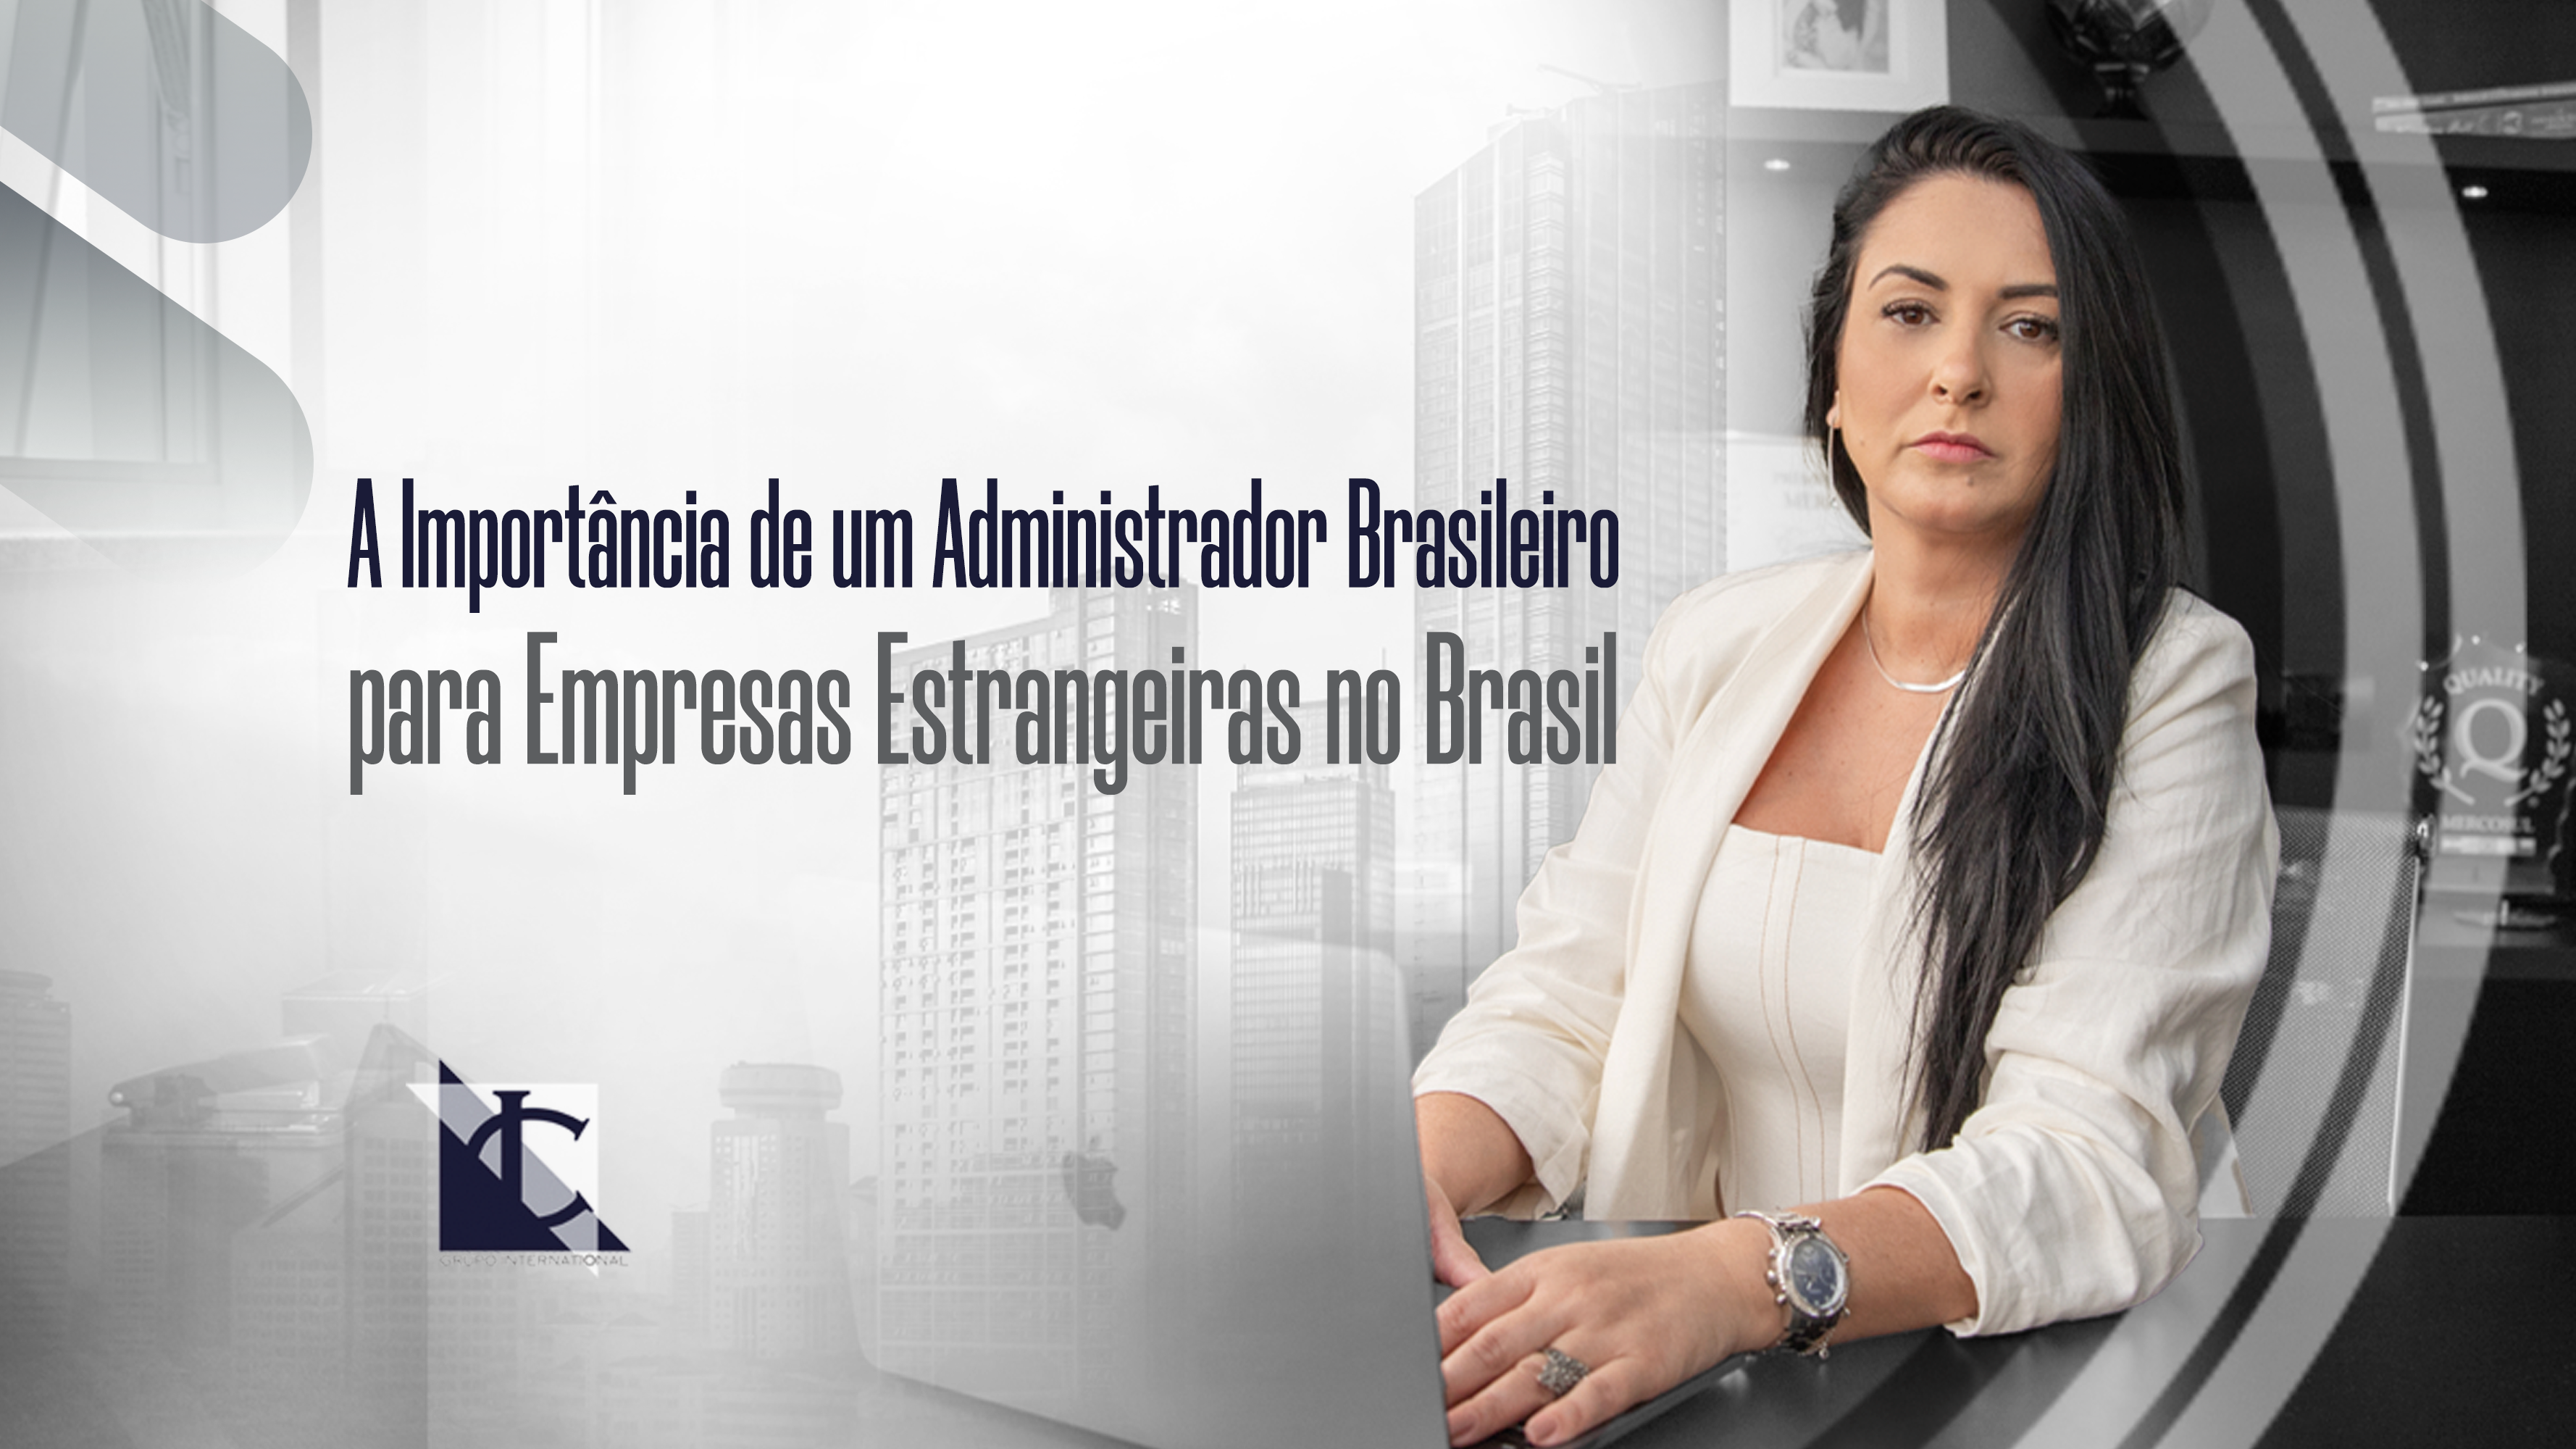 You are currently viewing The Importance of a Brazilian Administrator for Foreign Companies in Brazil